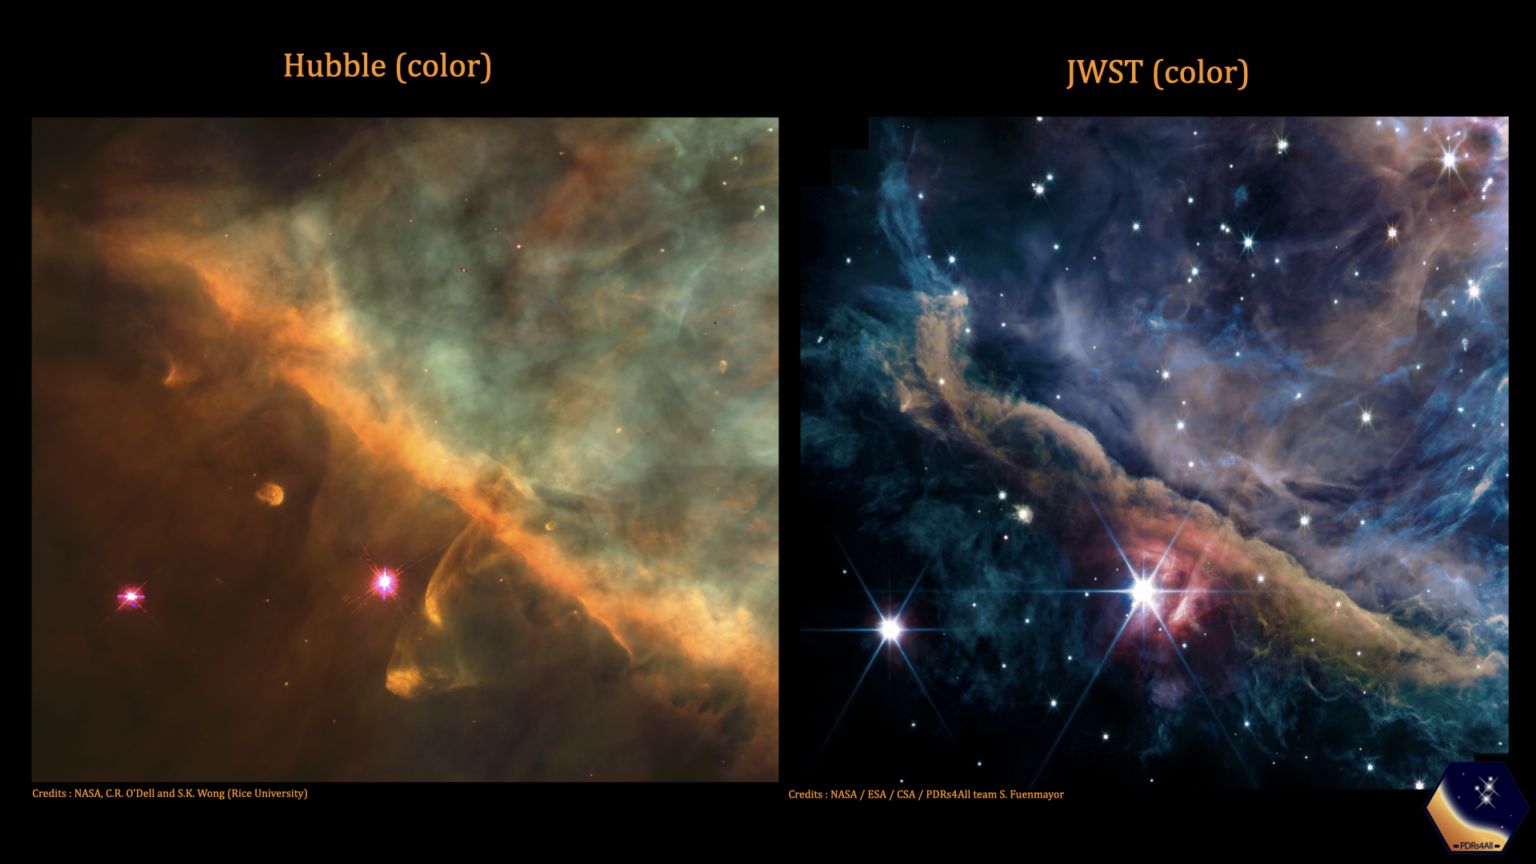 comparison of images from hubble and jwst of the same orion region, showing how much more detail jwst reveals